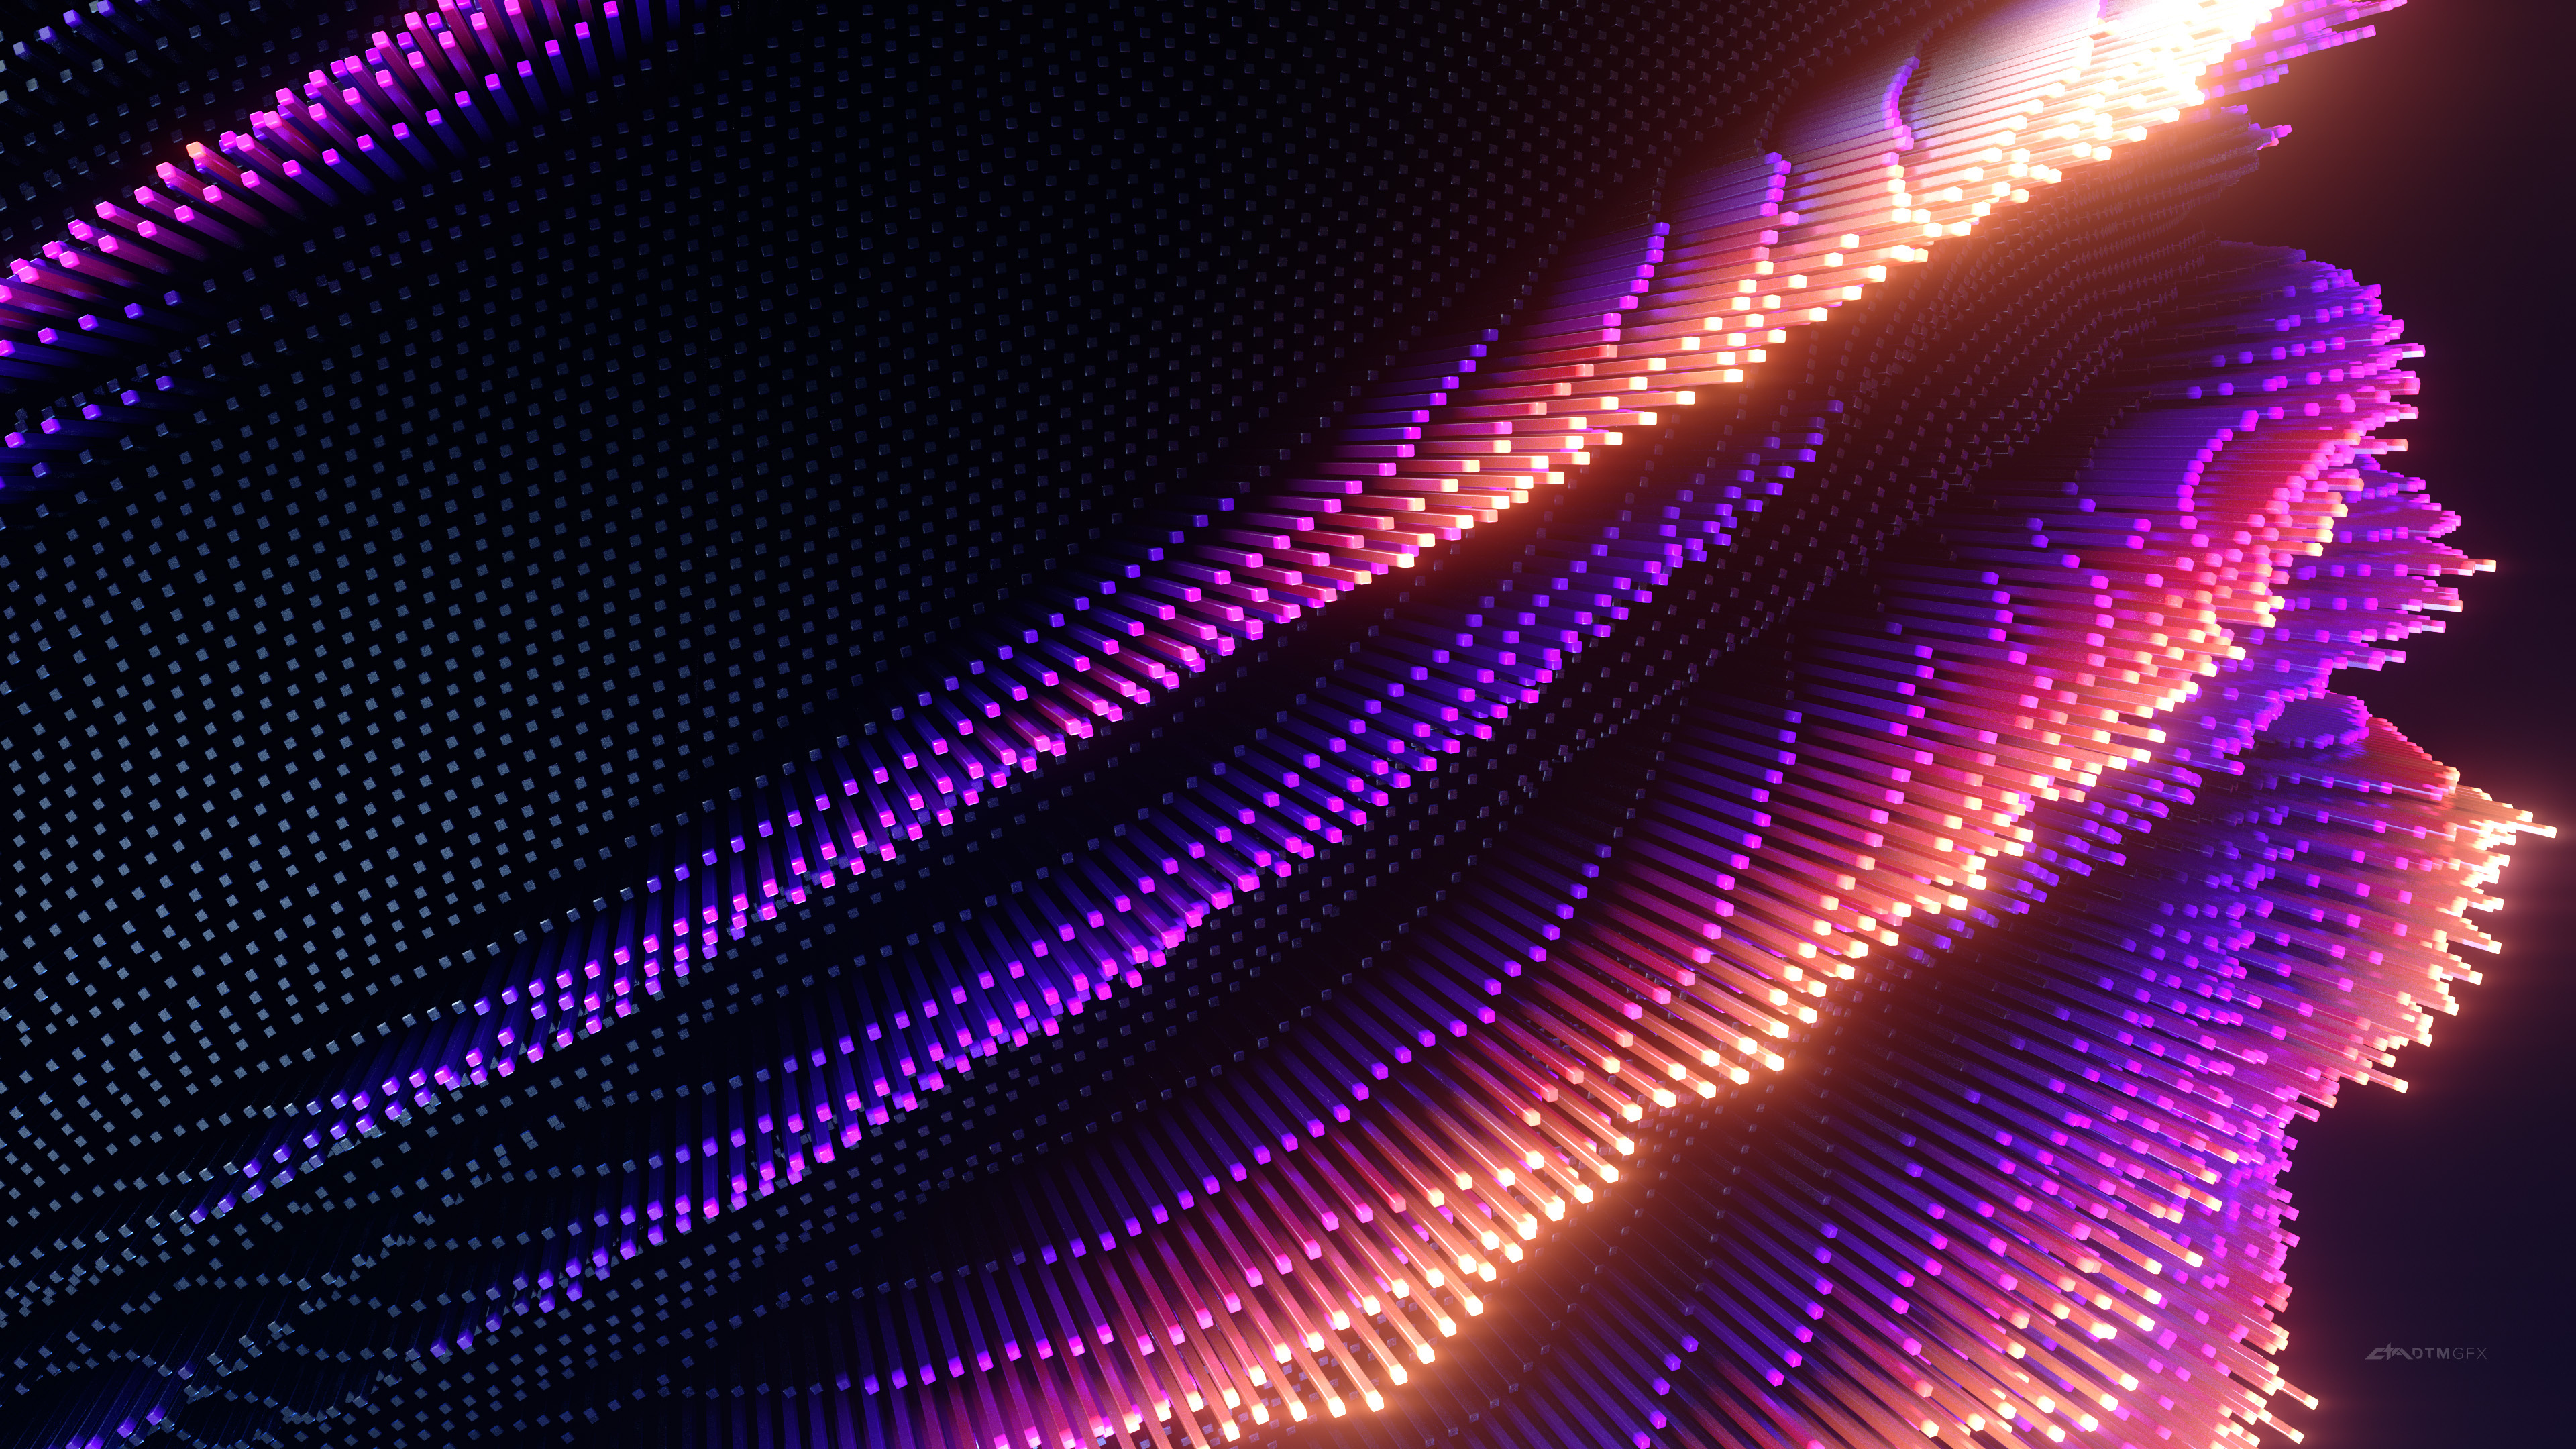 Backdrop: Glowing rays, Colorful, Dark, Abstract, Three-dimensional space, Squares. 3840x2160 4K Background.